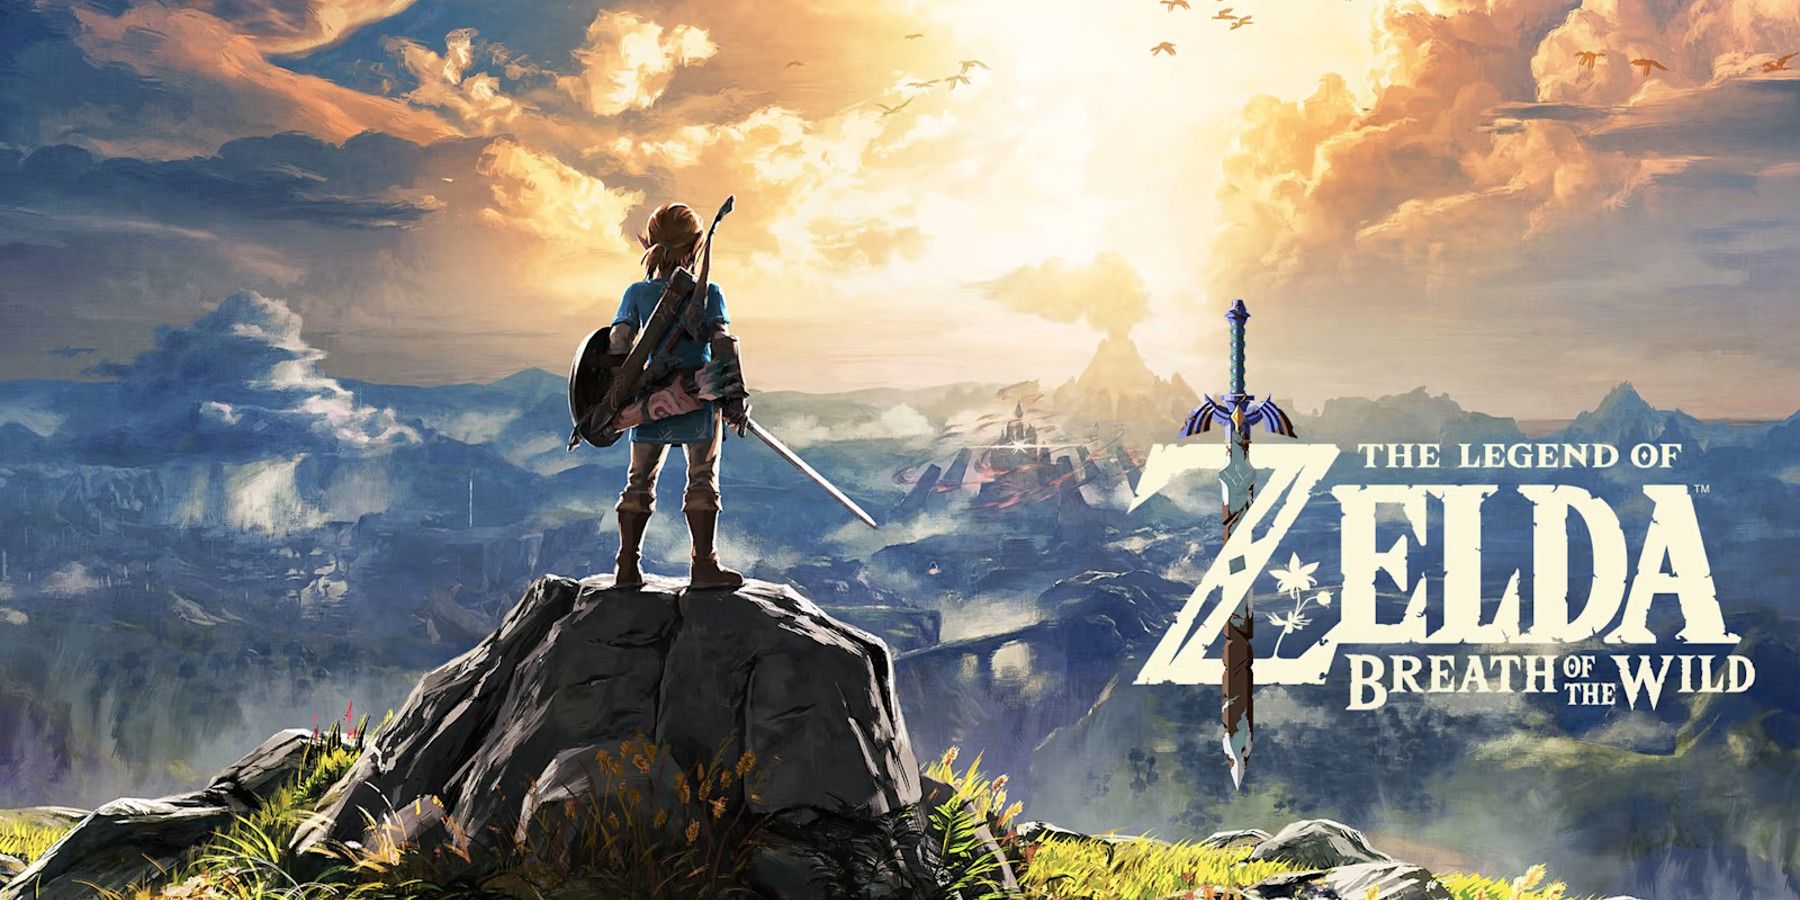 Link looking at the mountain ahead in The Legend of Zelda: Breath of the Wild